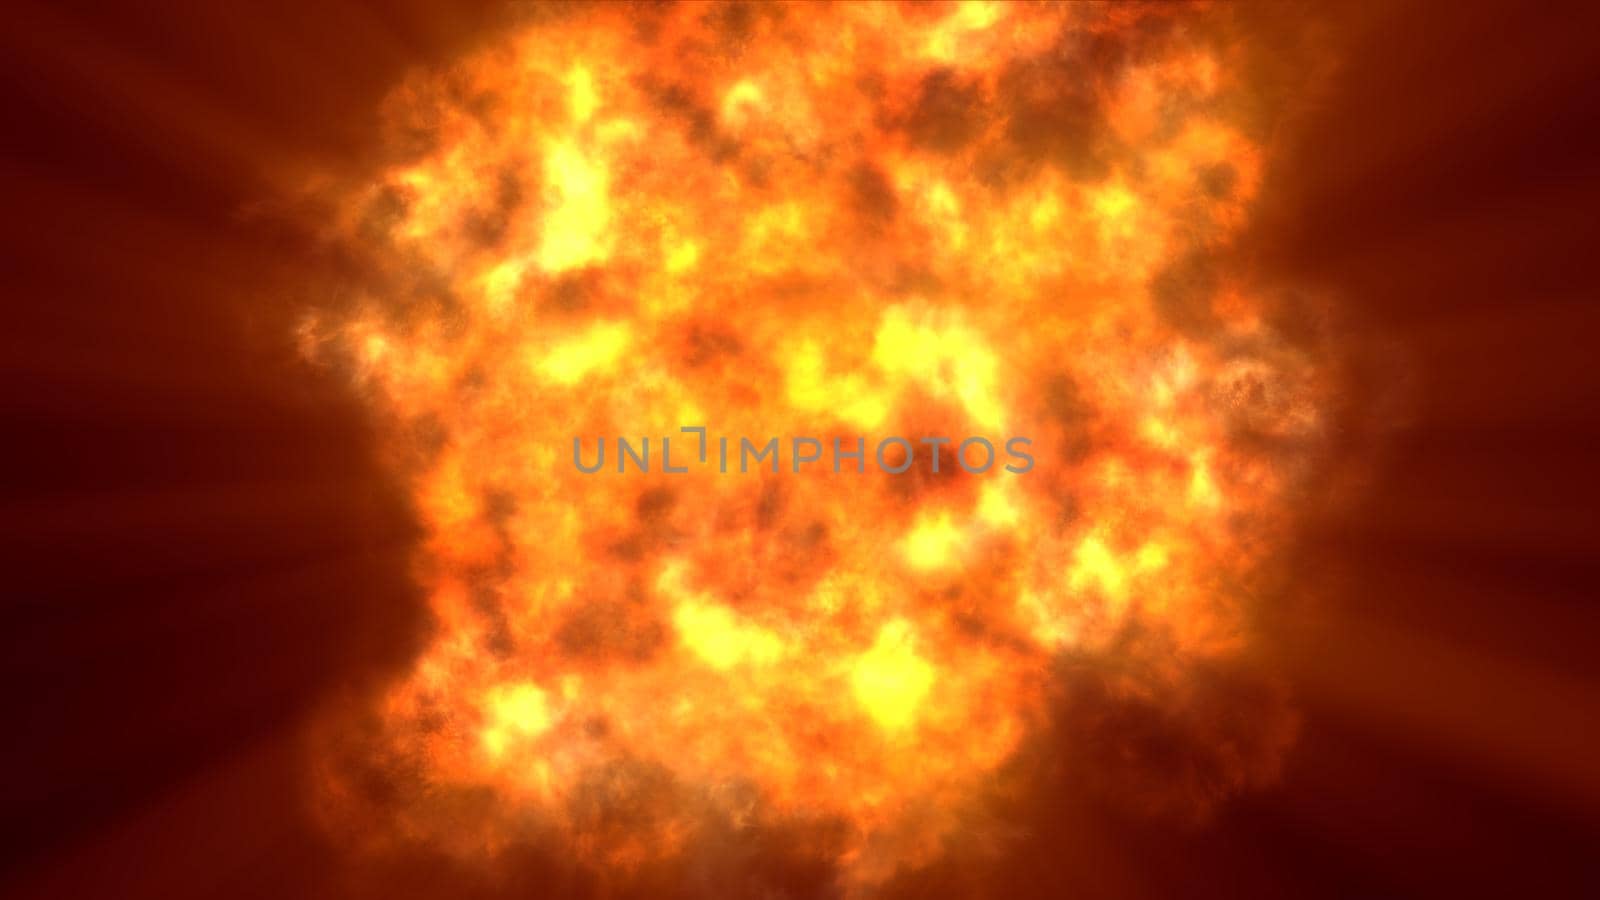 fire flame ball explosion in space, illustration by alex_nako